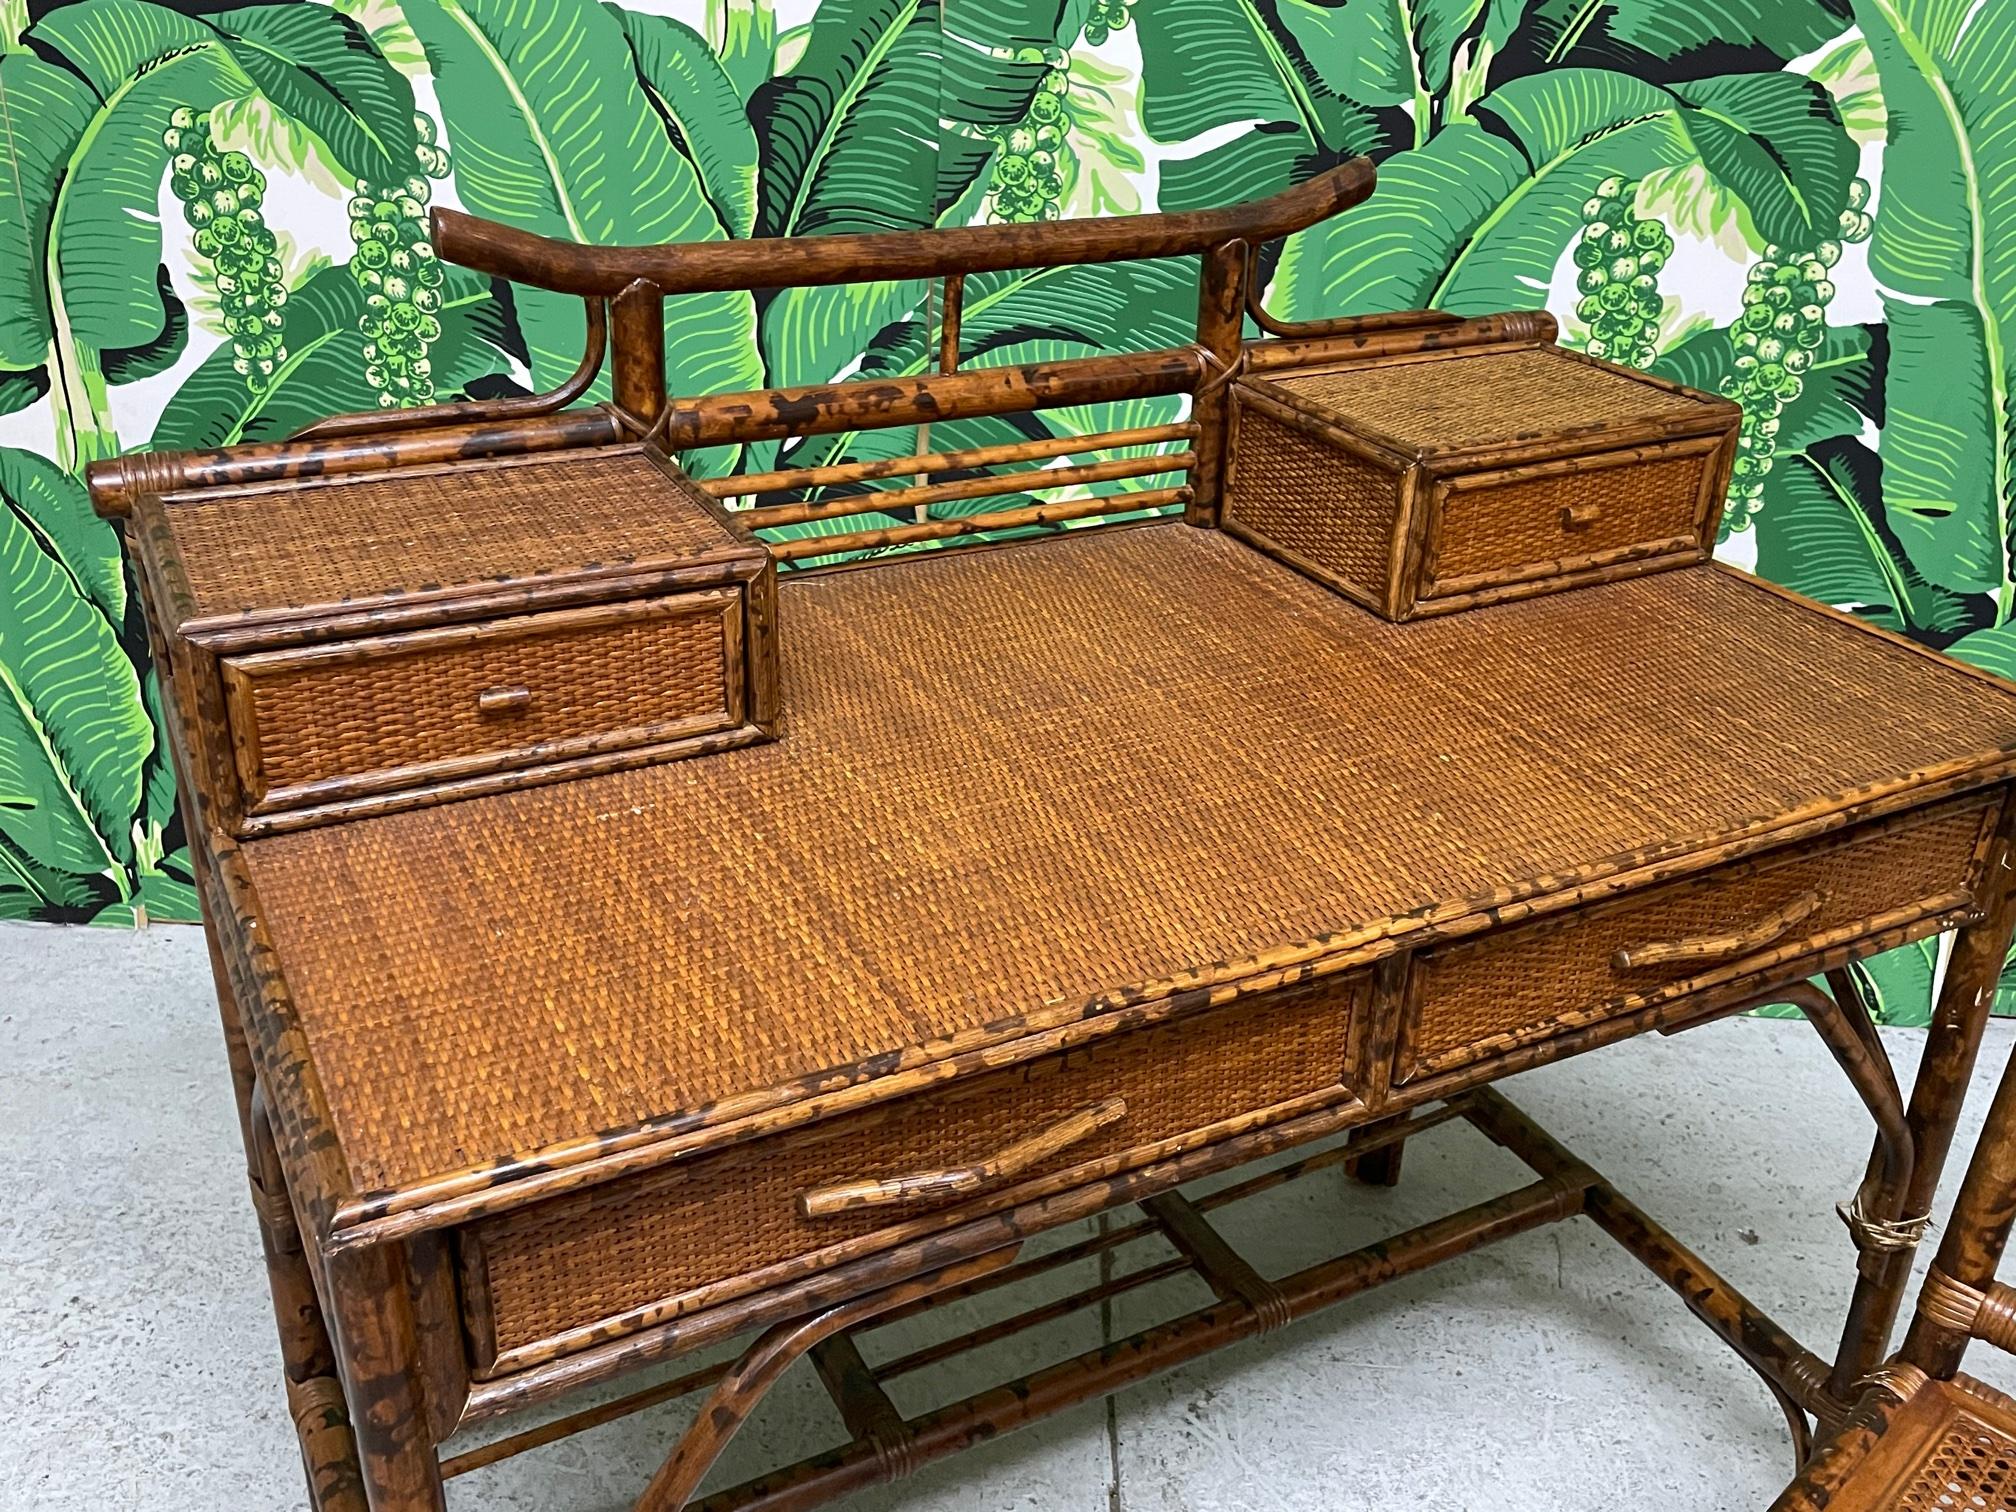 Bamboo and rattan writing desk features Asian chinoiserie style along with a matching chair. Made for Bloomingdale's. Very good condition with minor imperfections consistent with age. Desk measures 41.5